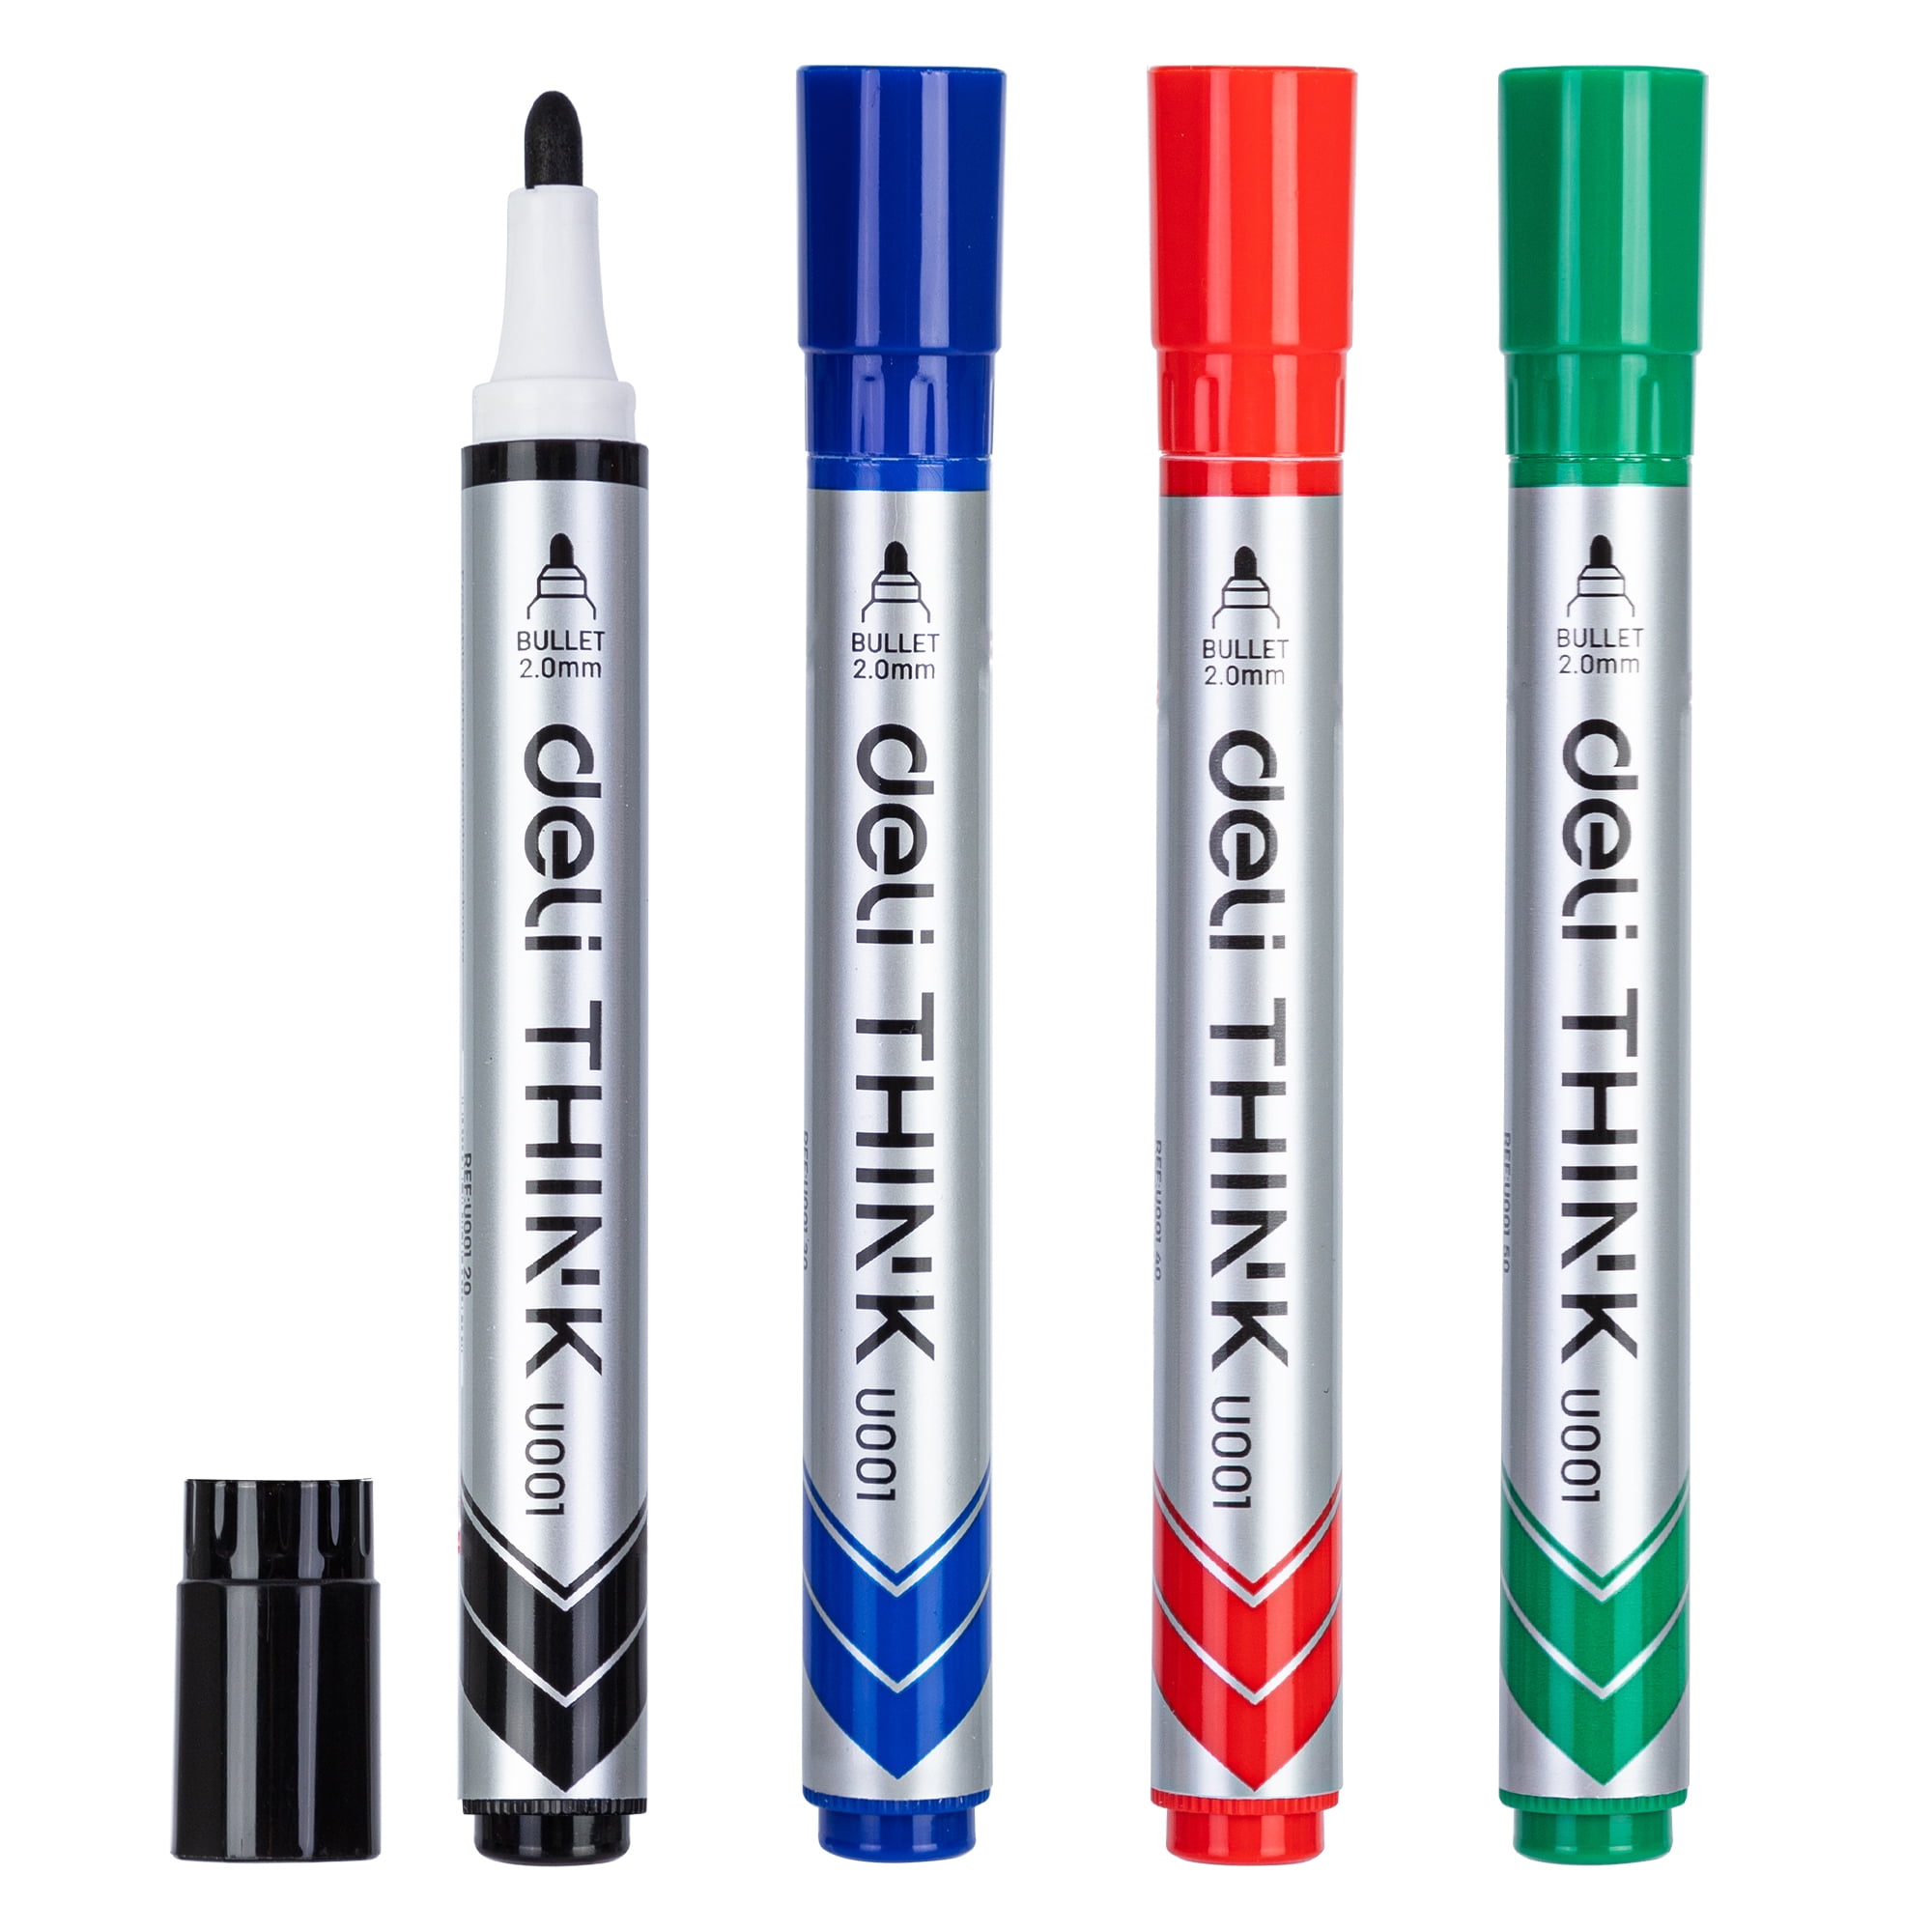 Think2Master [8 Markers - 3 Colors] Think2 Magnetic Mini Dry Erase Markers with eraser. (6 Black, 1 Red, 1 Blue) AP Certified German Ink.